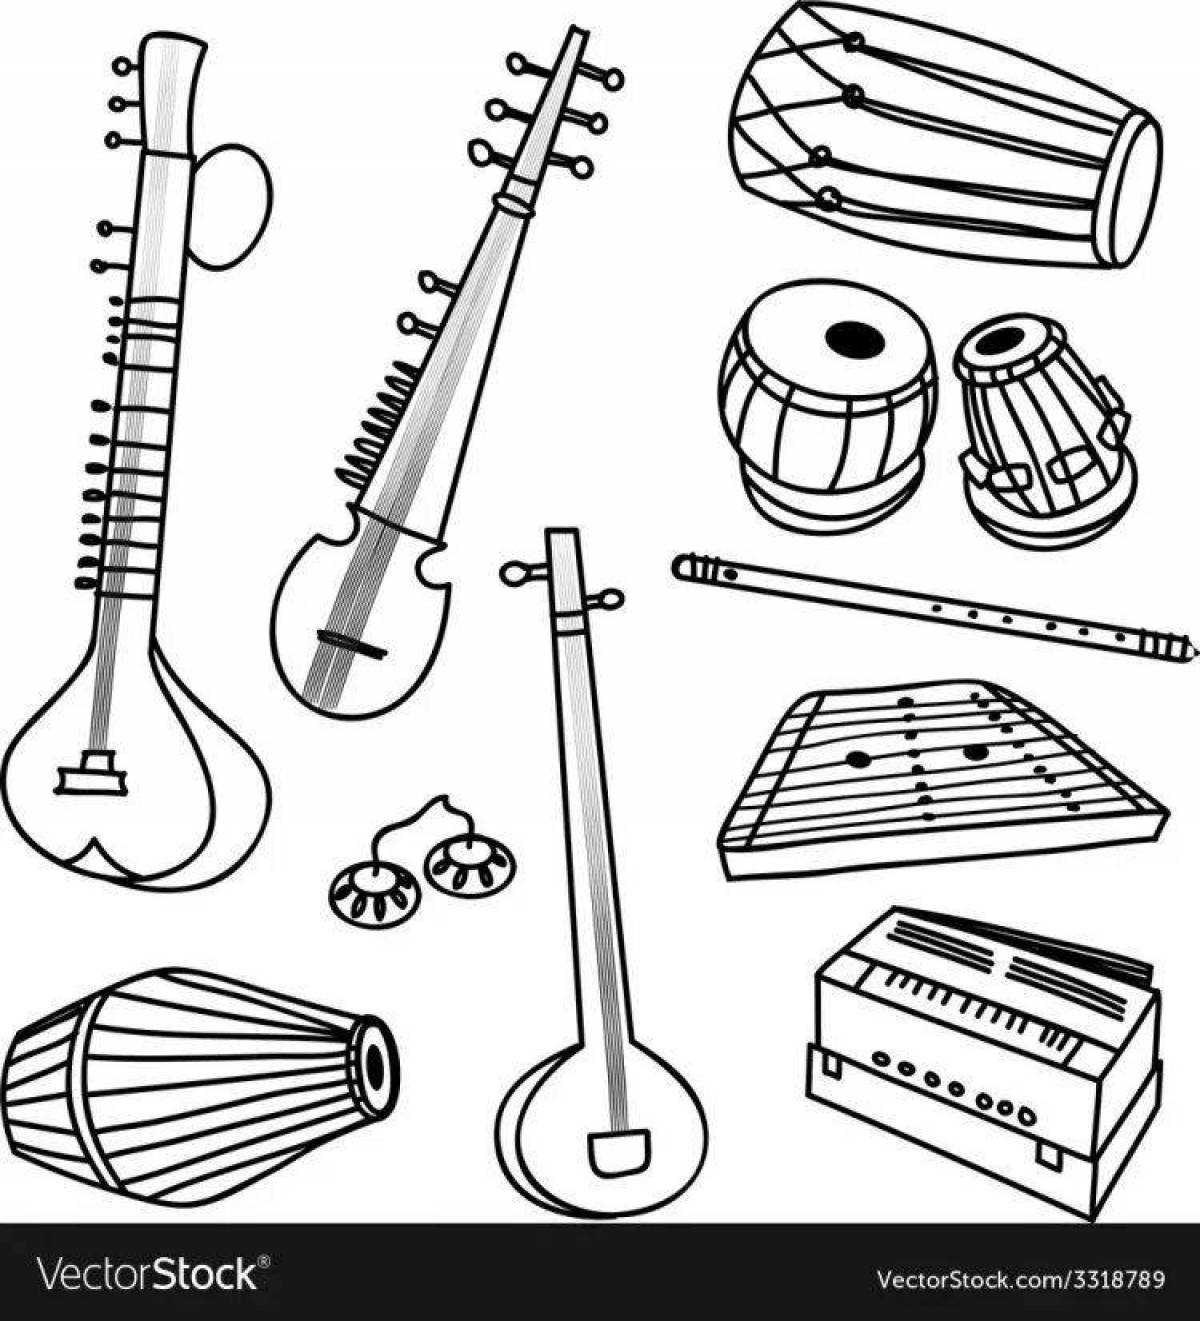 Dazzling coloring page folk instruments